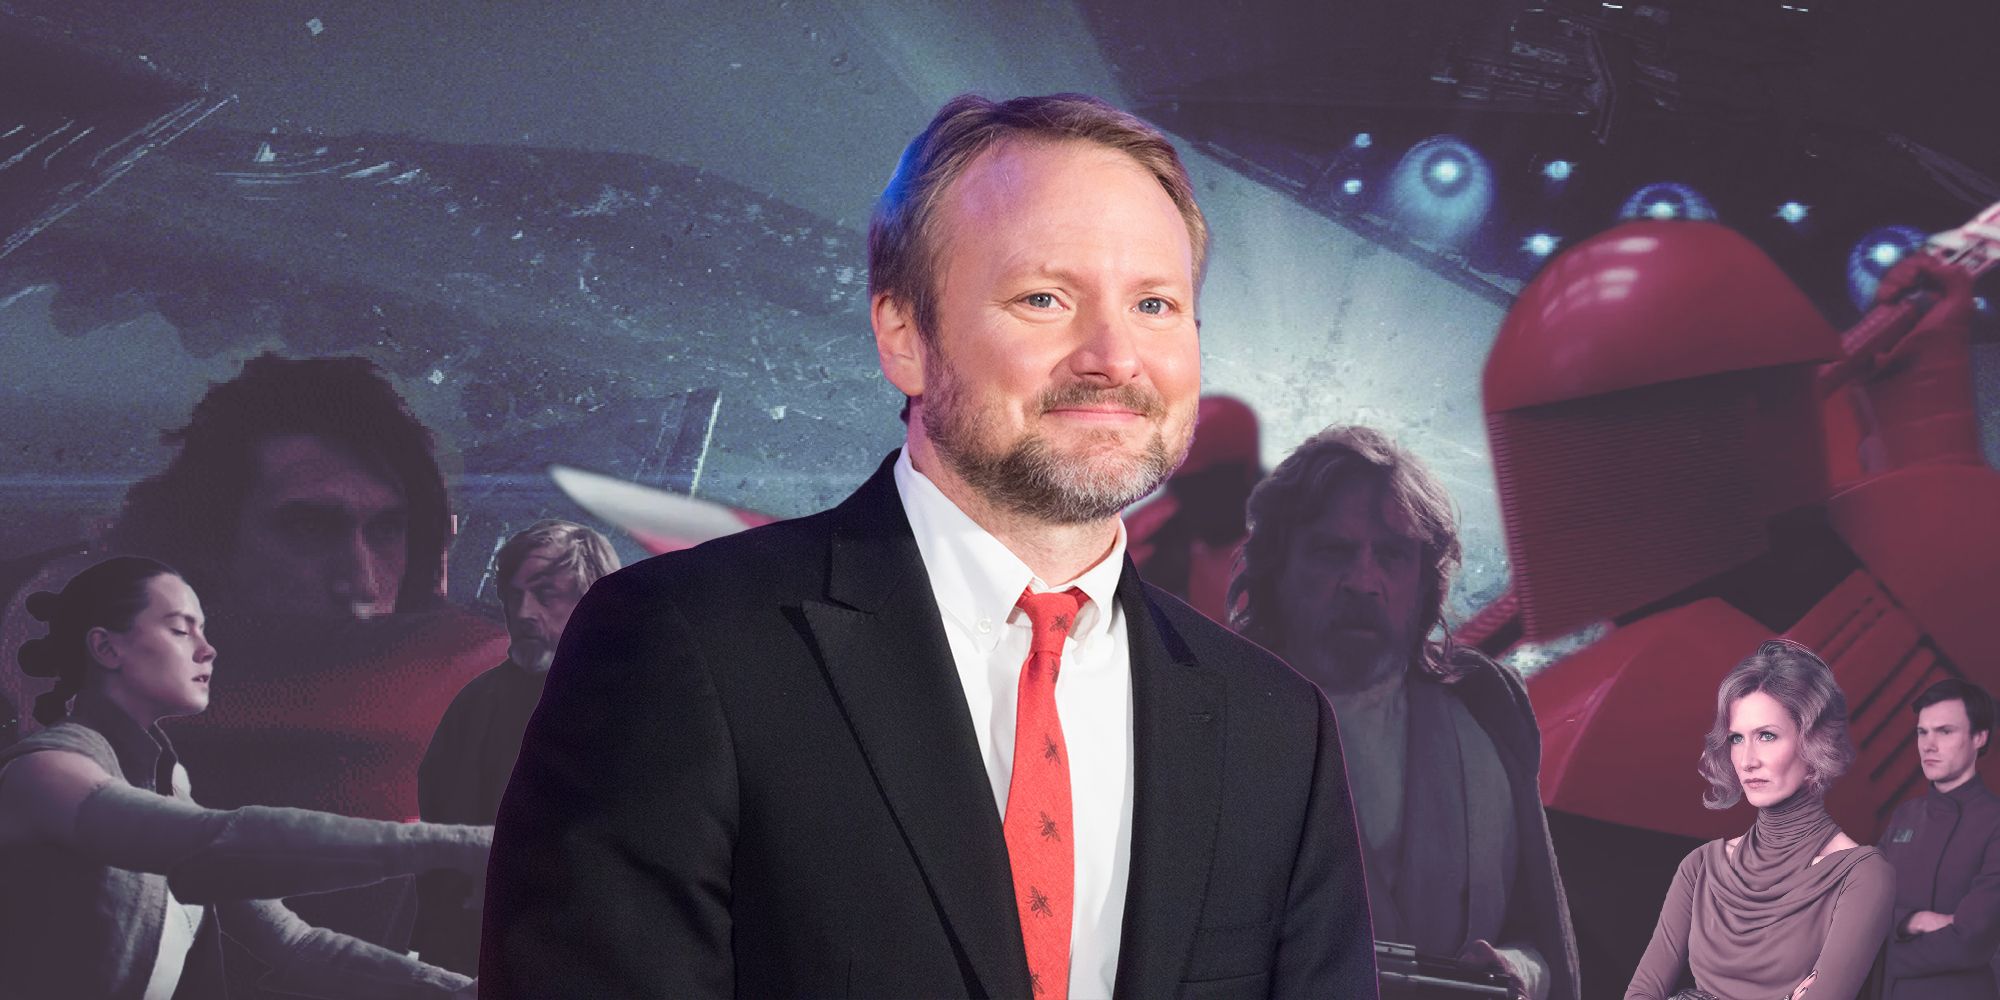 Rian Johnson's Star Wars Trilogy Is 'Not Actively' in Development - IGN